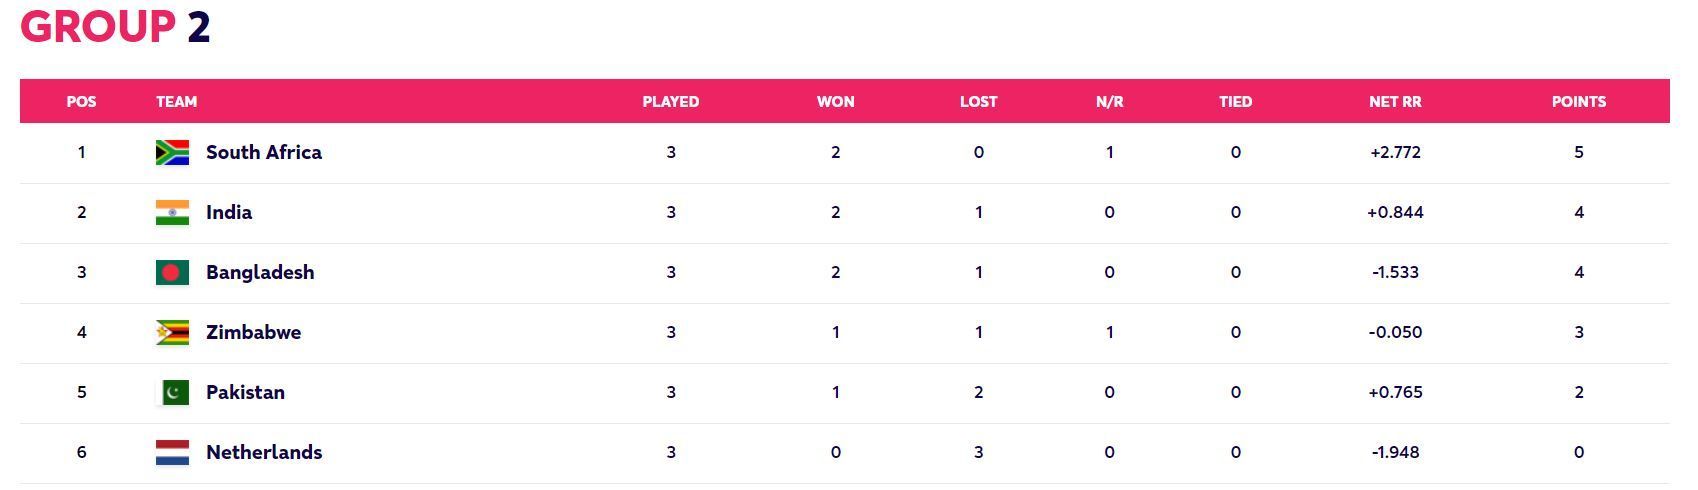 Updated Points Table after Match 30 of T20 World Cup (Image Courtesy: www.t20worldcup.com)